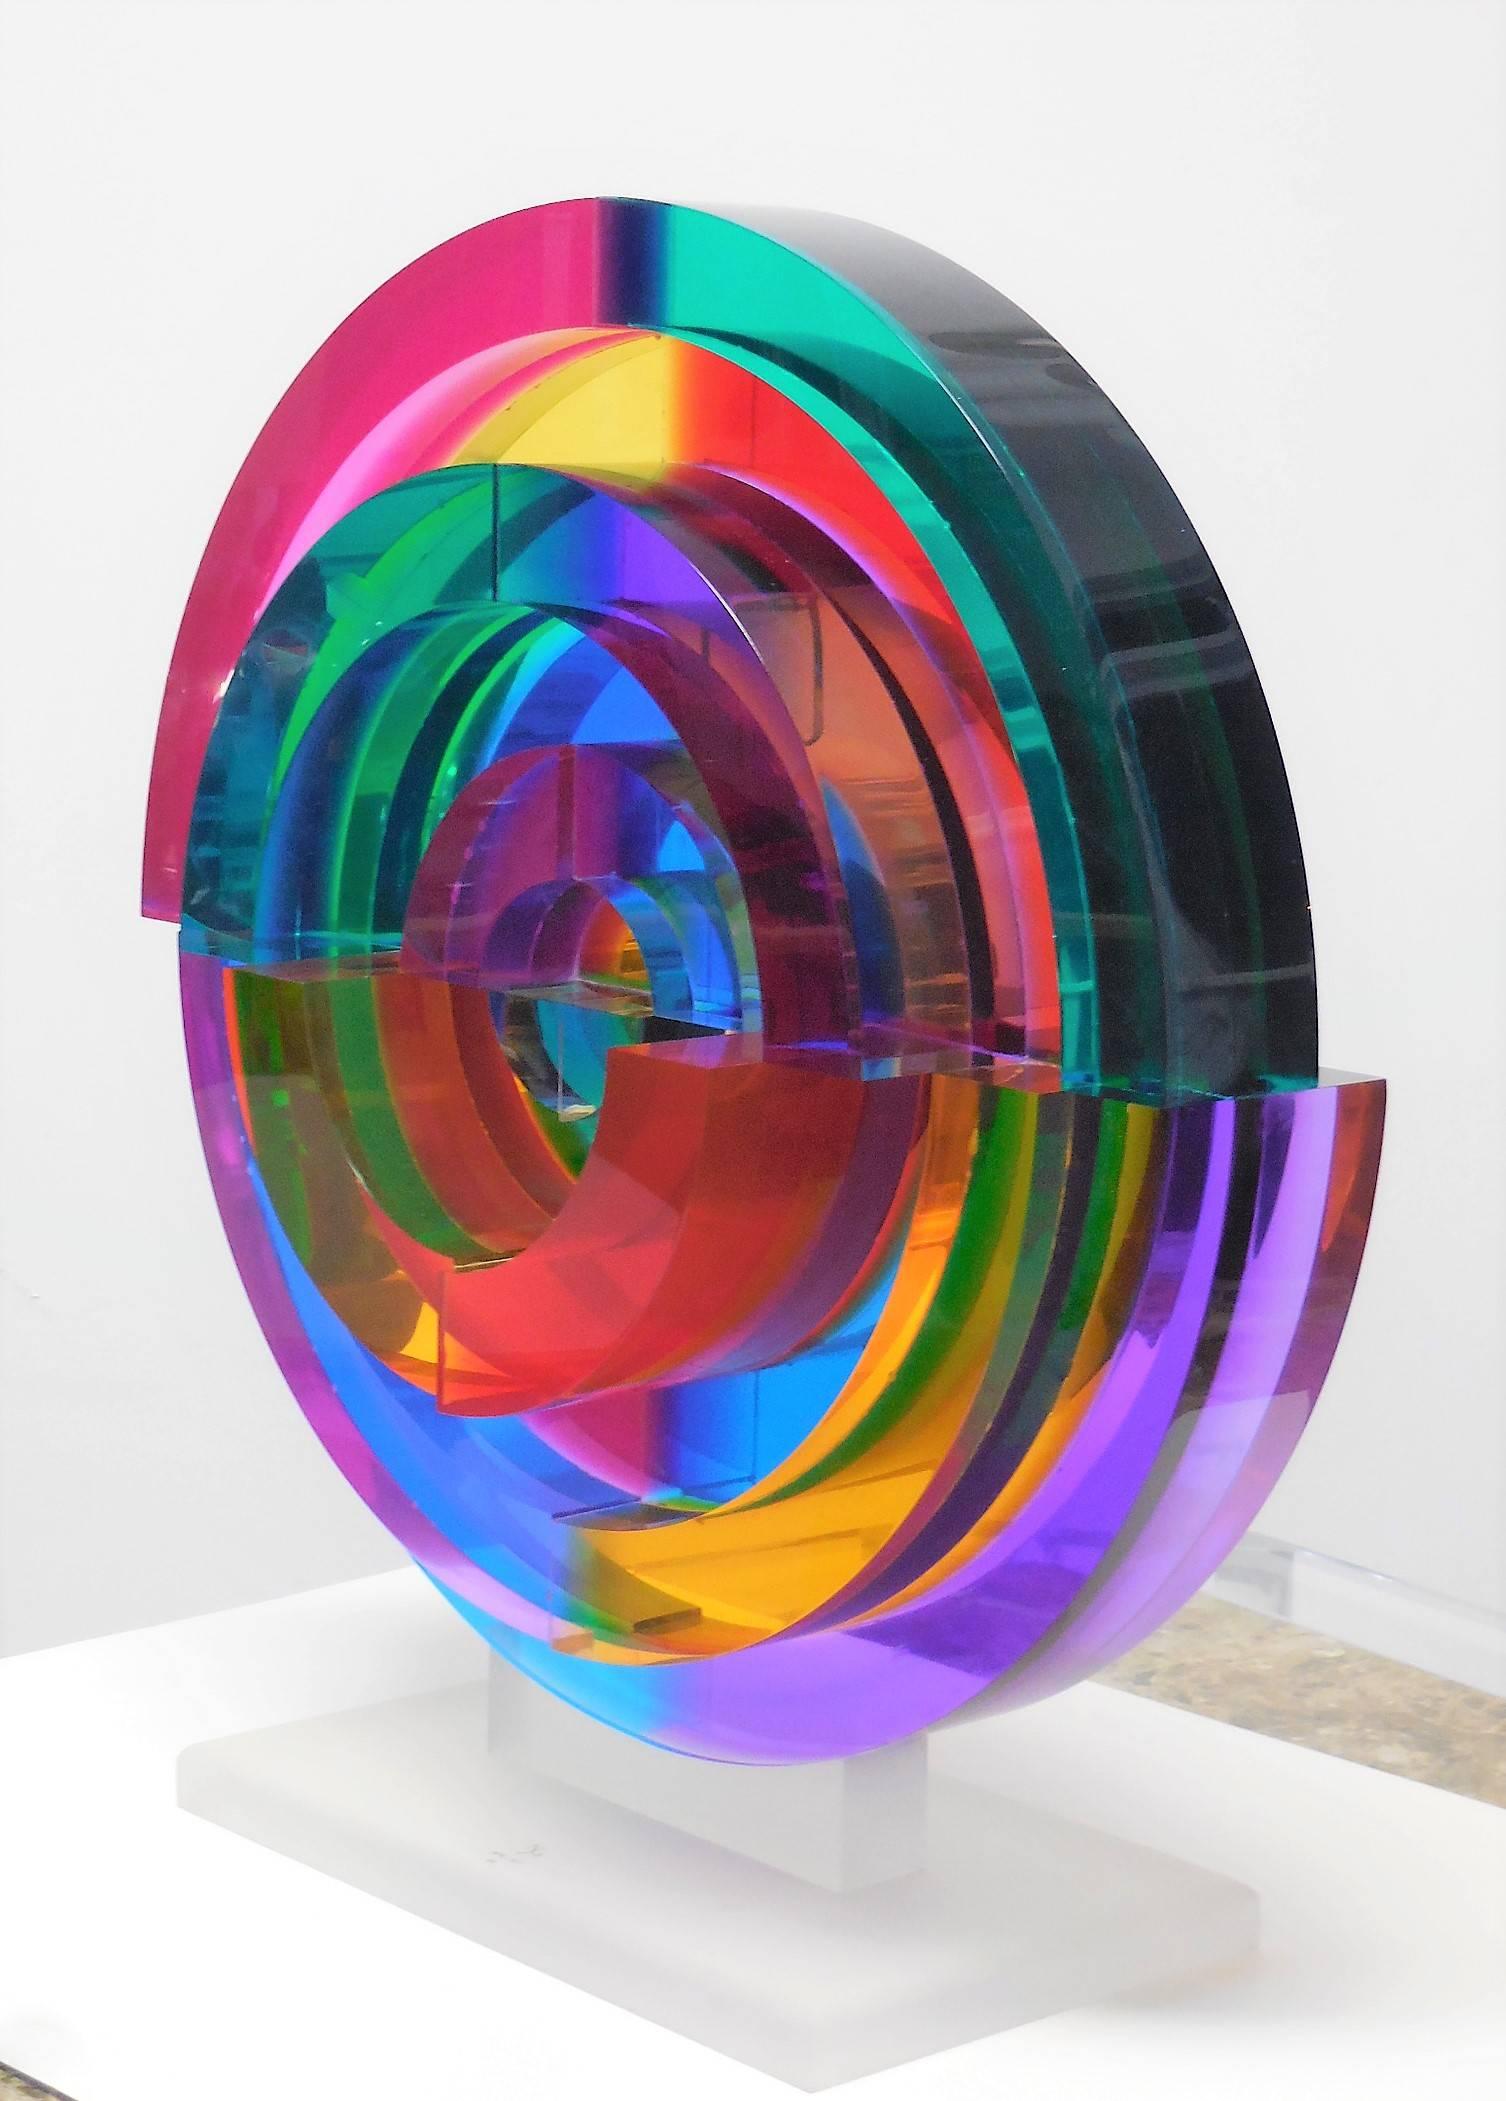 Amazing to say the least. This Lucite sculpture is colorful as well as having a substantial presence and unexpected design. Multiple radial pieces are arranged in a concentric design with different depths and color combinations. Spectacular if